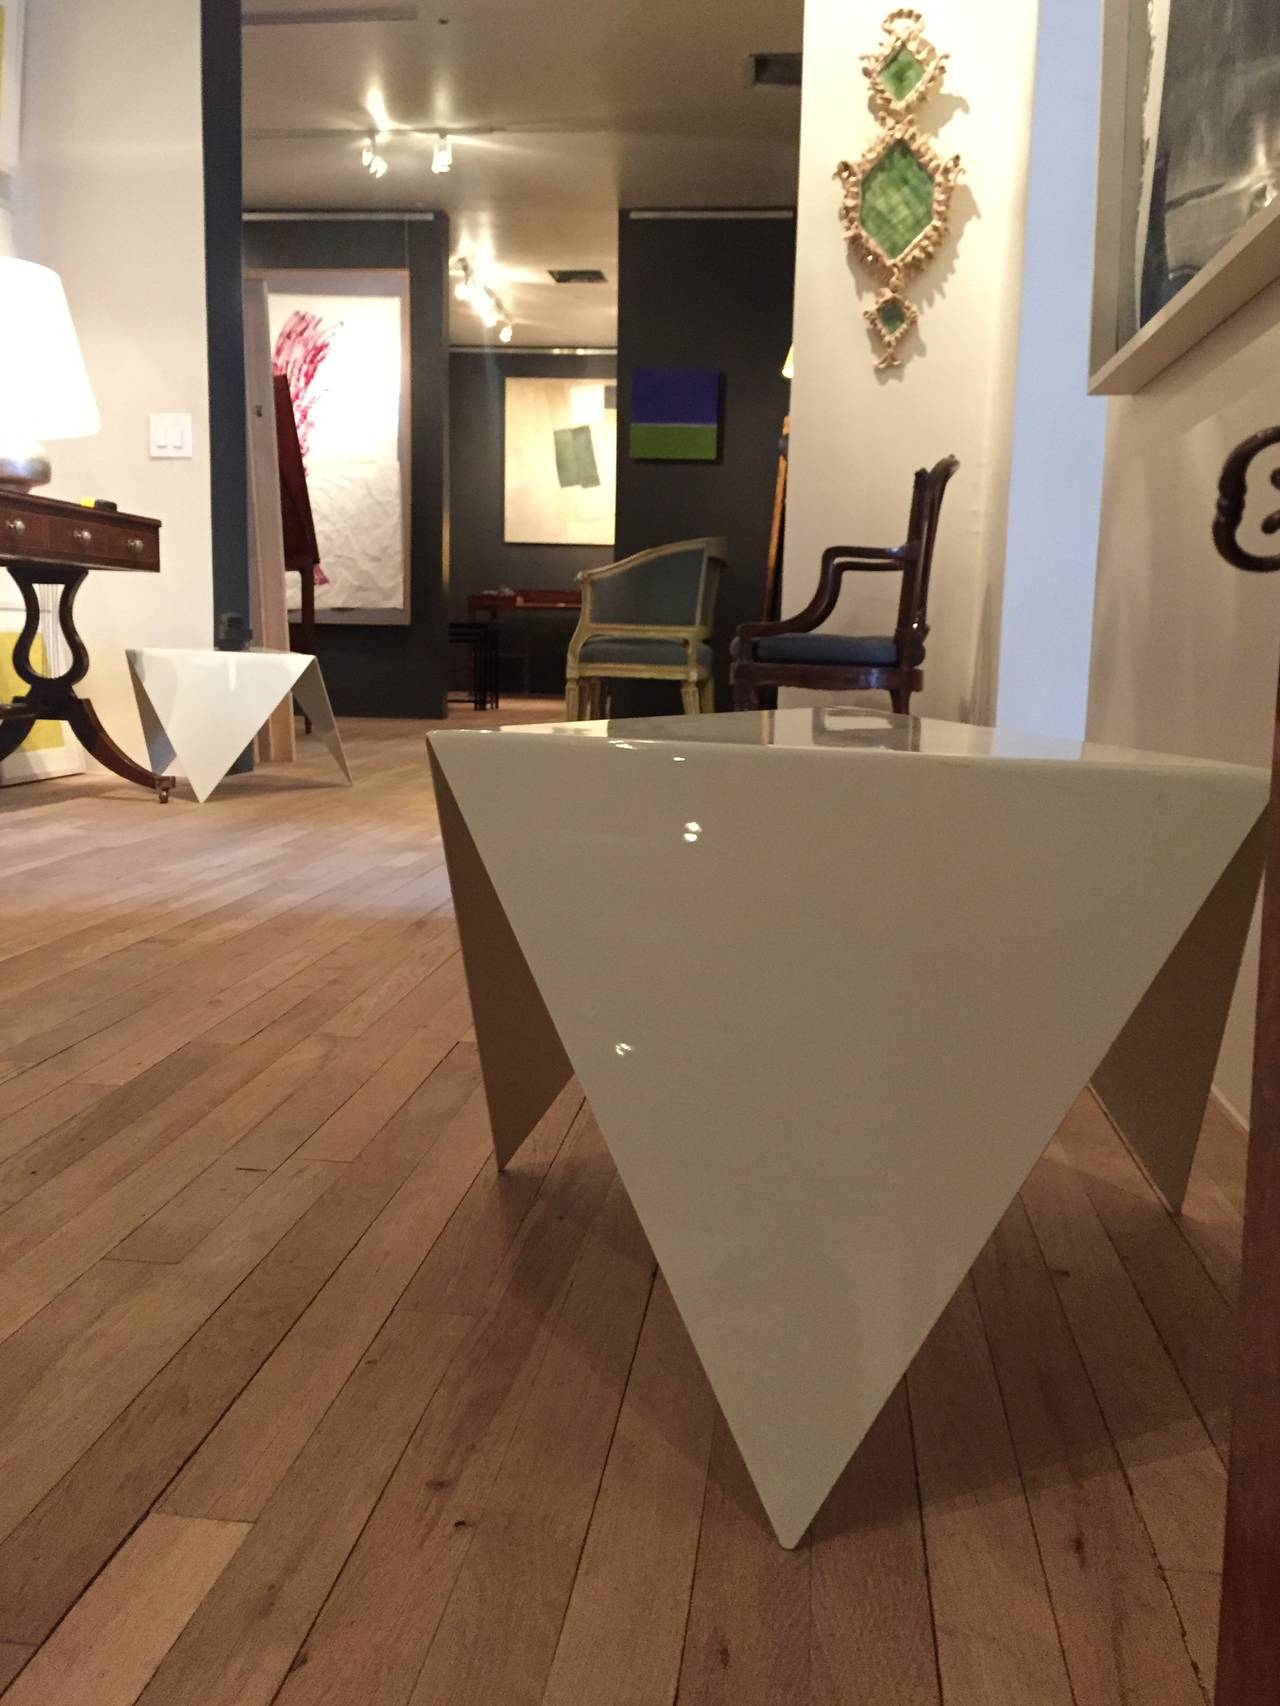 Cream lacquered steel triangular low table.
By Gerald Bland.
Available in polished steel, cream, grey, or custom finish.